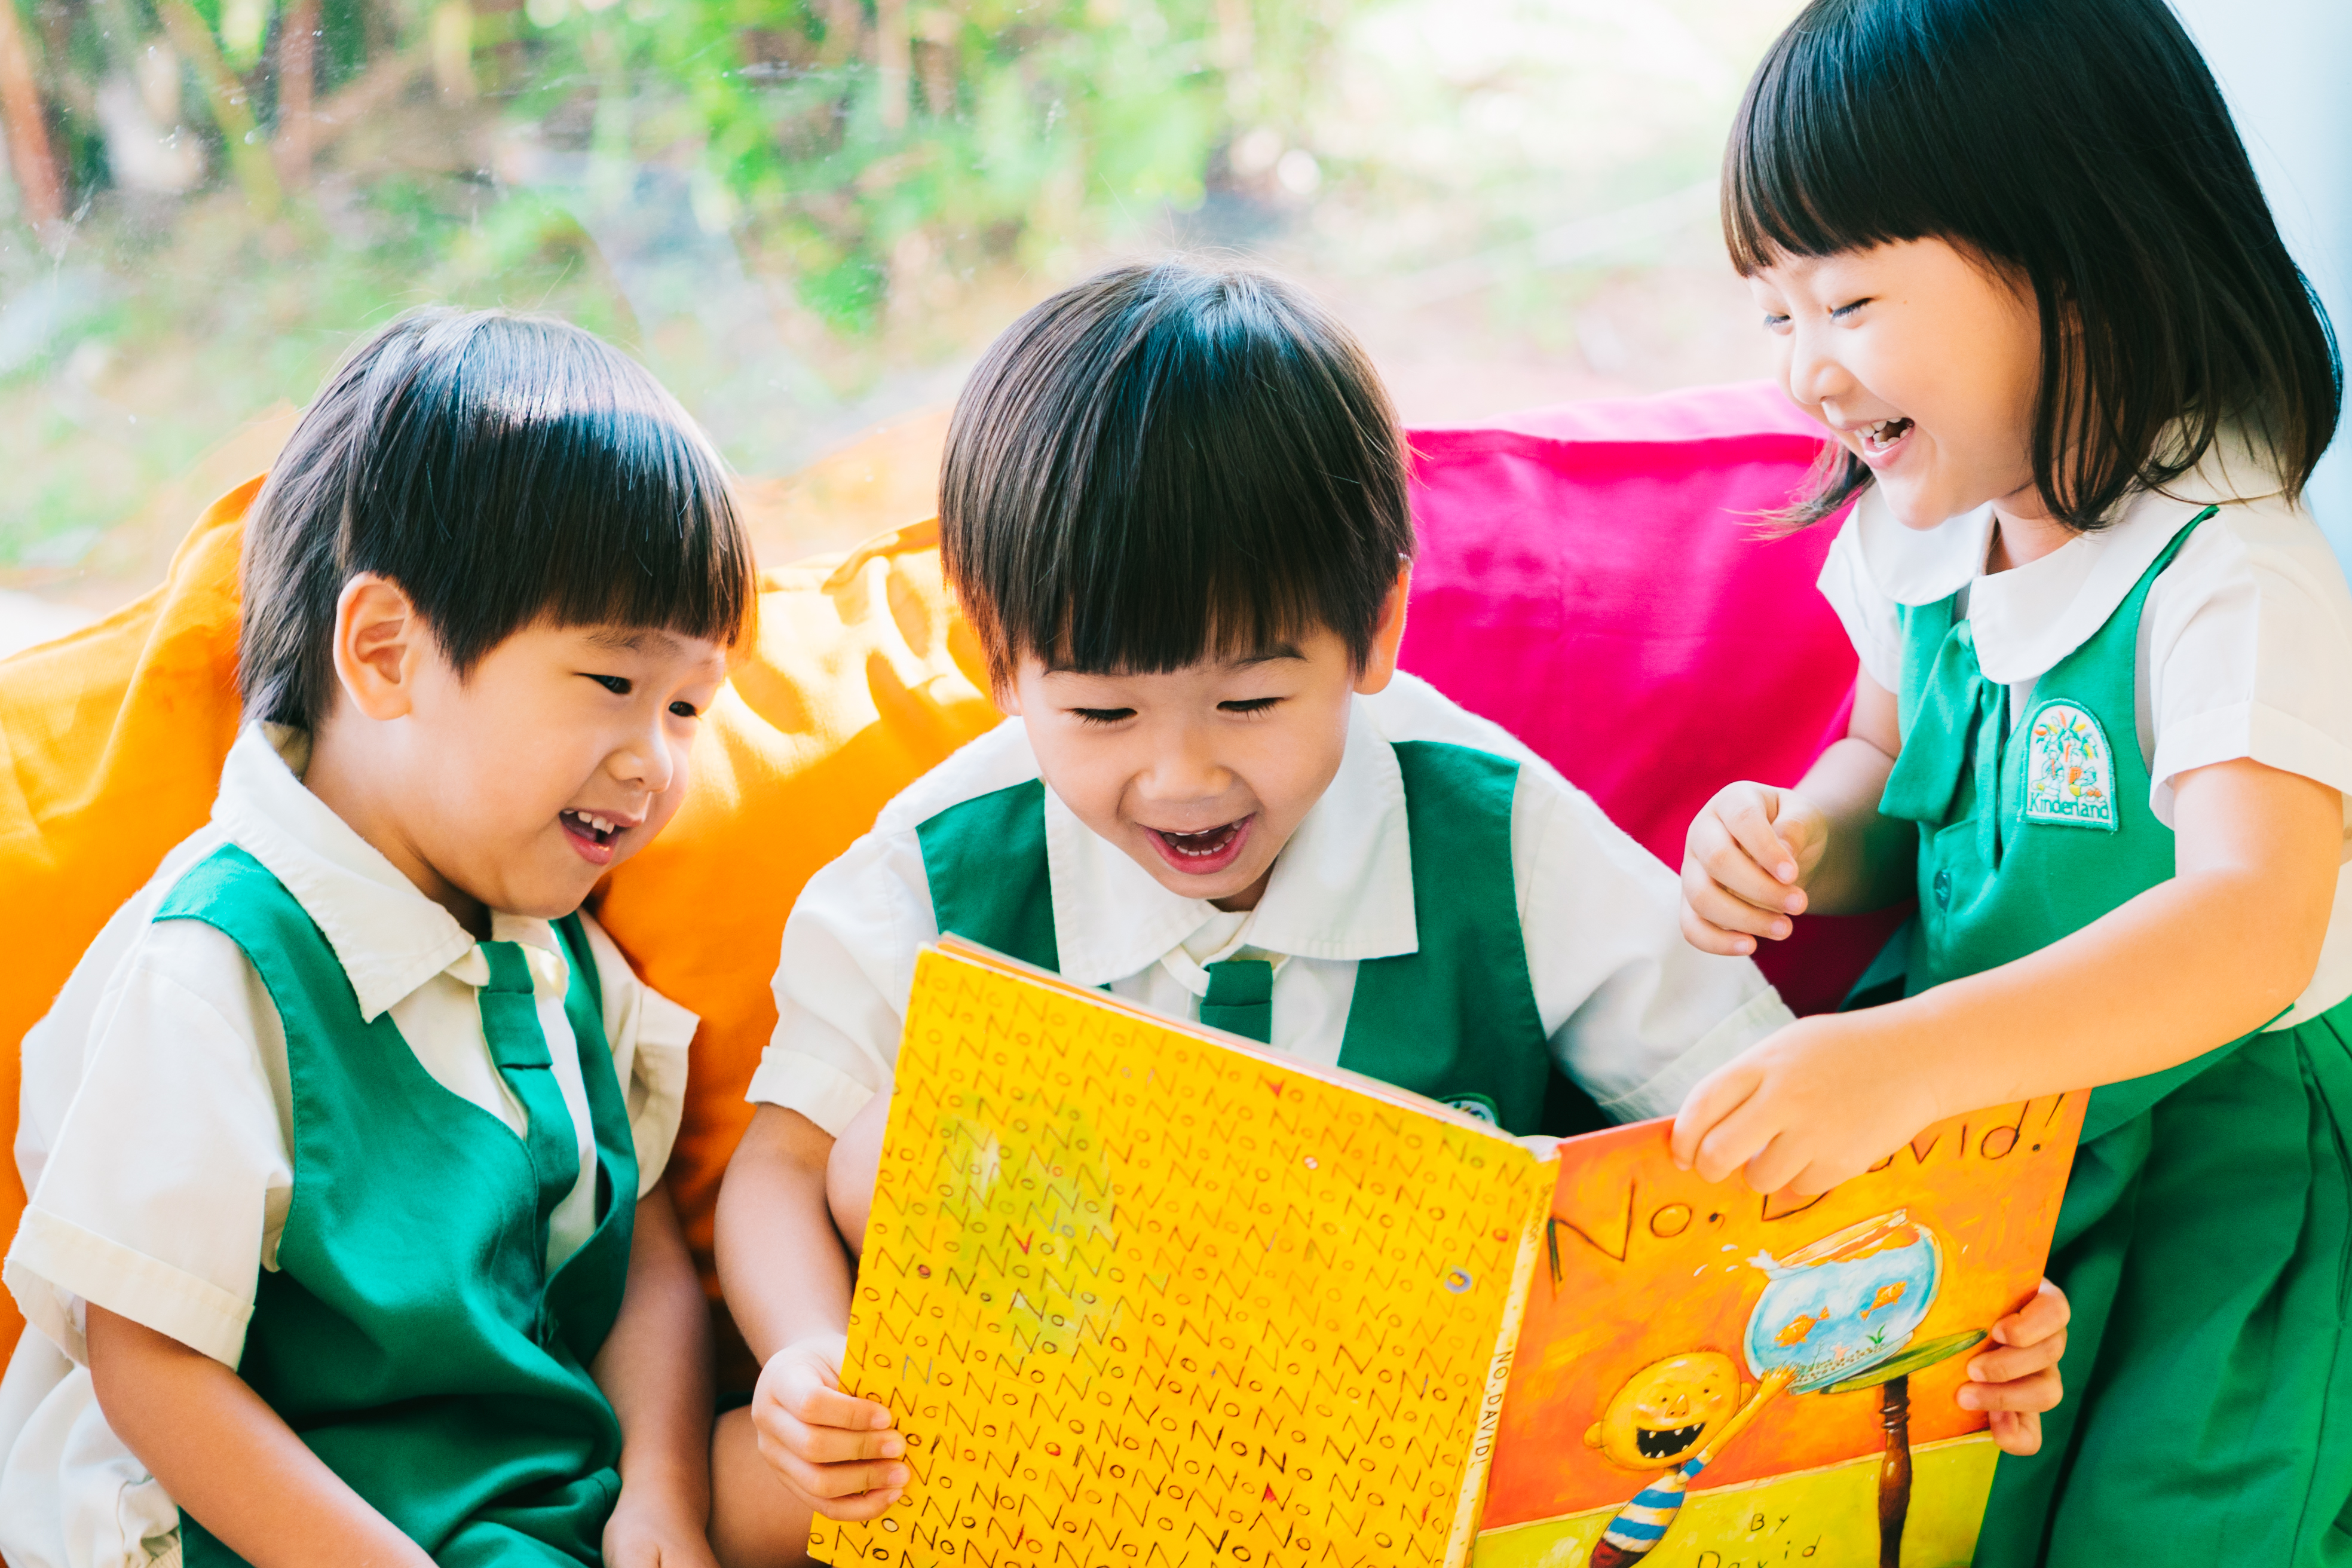 Children discover the world through reading